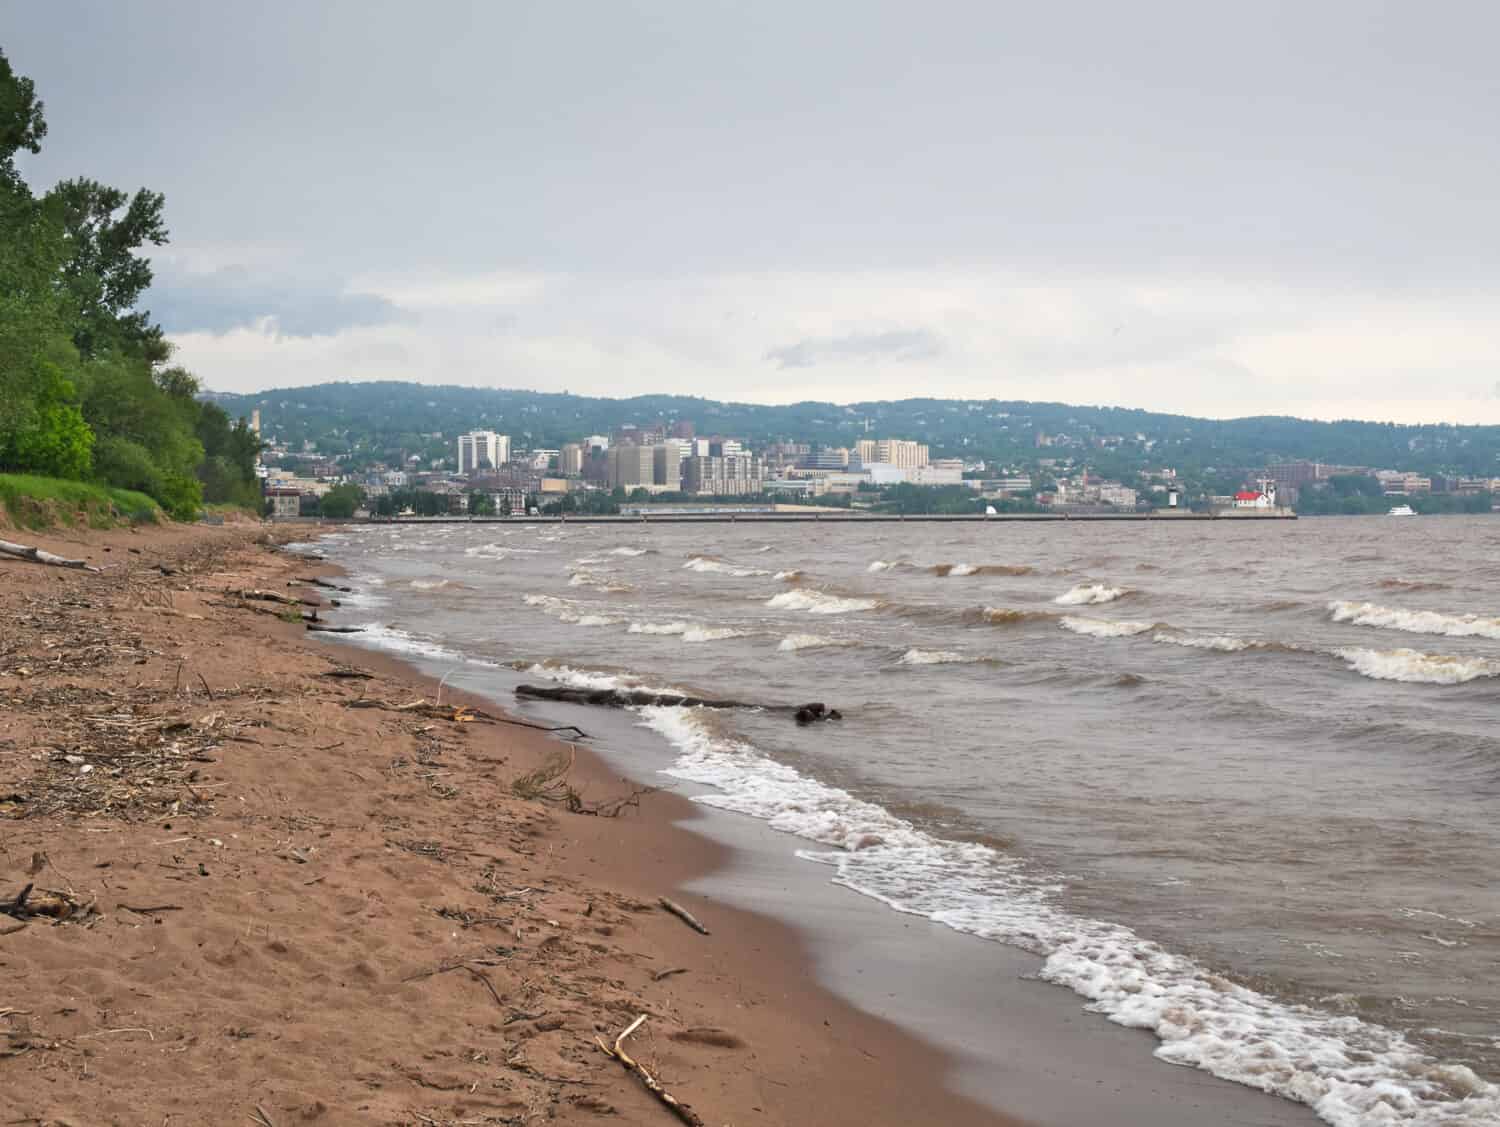 Park Point Beach with driftwood on Lake Superior with Duluth, Minnesota in background under cloudy sky